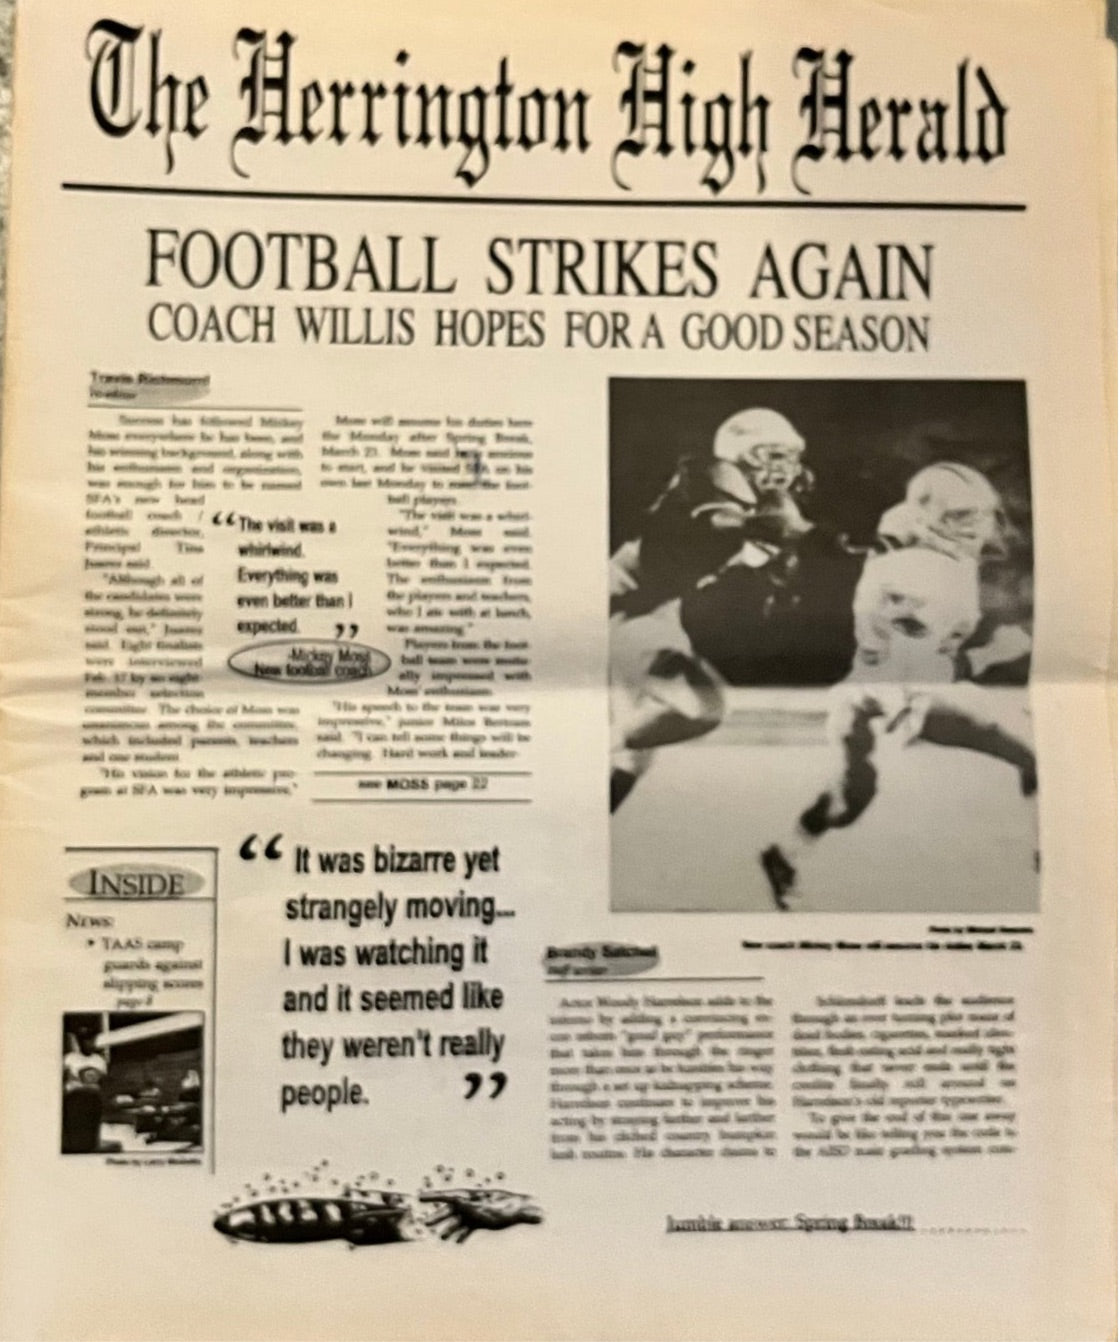 THE FACULTY MOVIE: Harrington High Harold Newspaper Prop Used On-screen